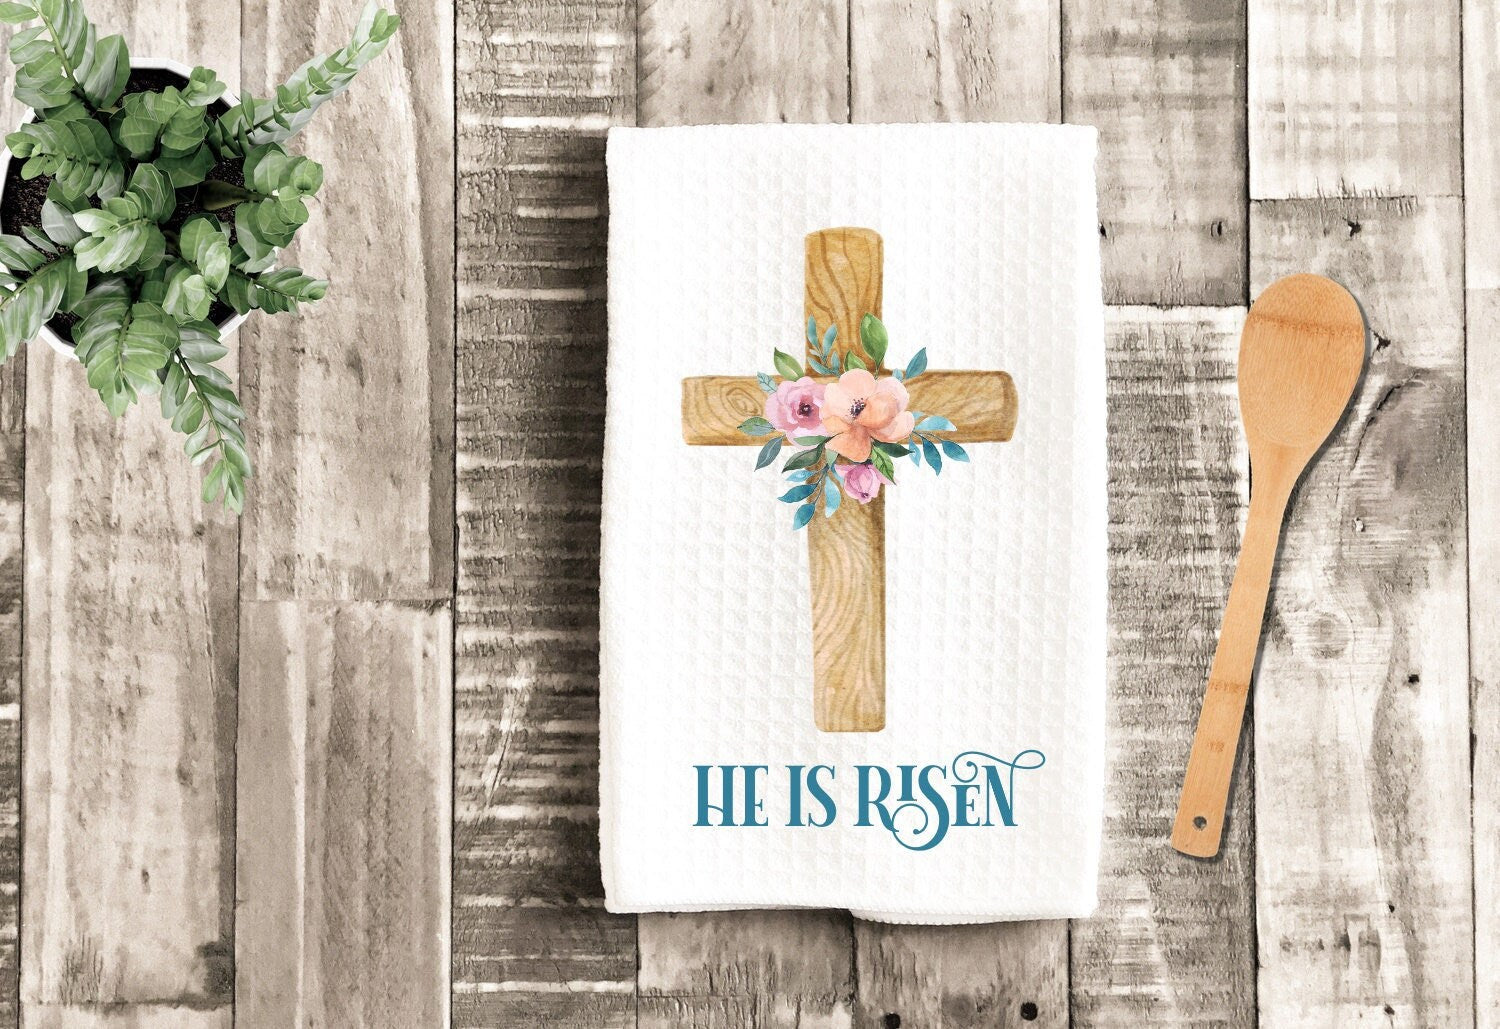 He Is Risen Cross Dish Towel - Floral Cross Christian Tea Towel Kitchen - New Home Gift, Housewarming Easter Decorations house Decor Towel